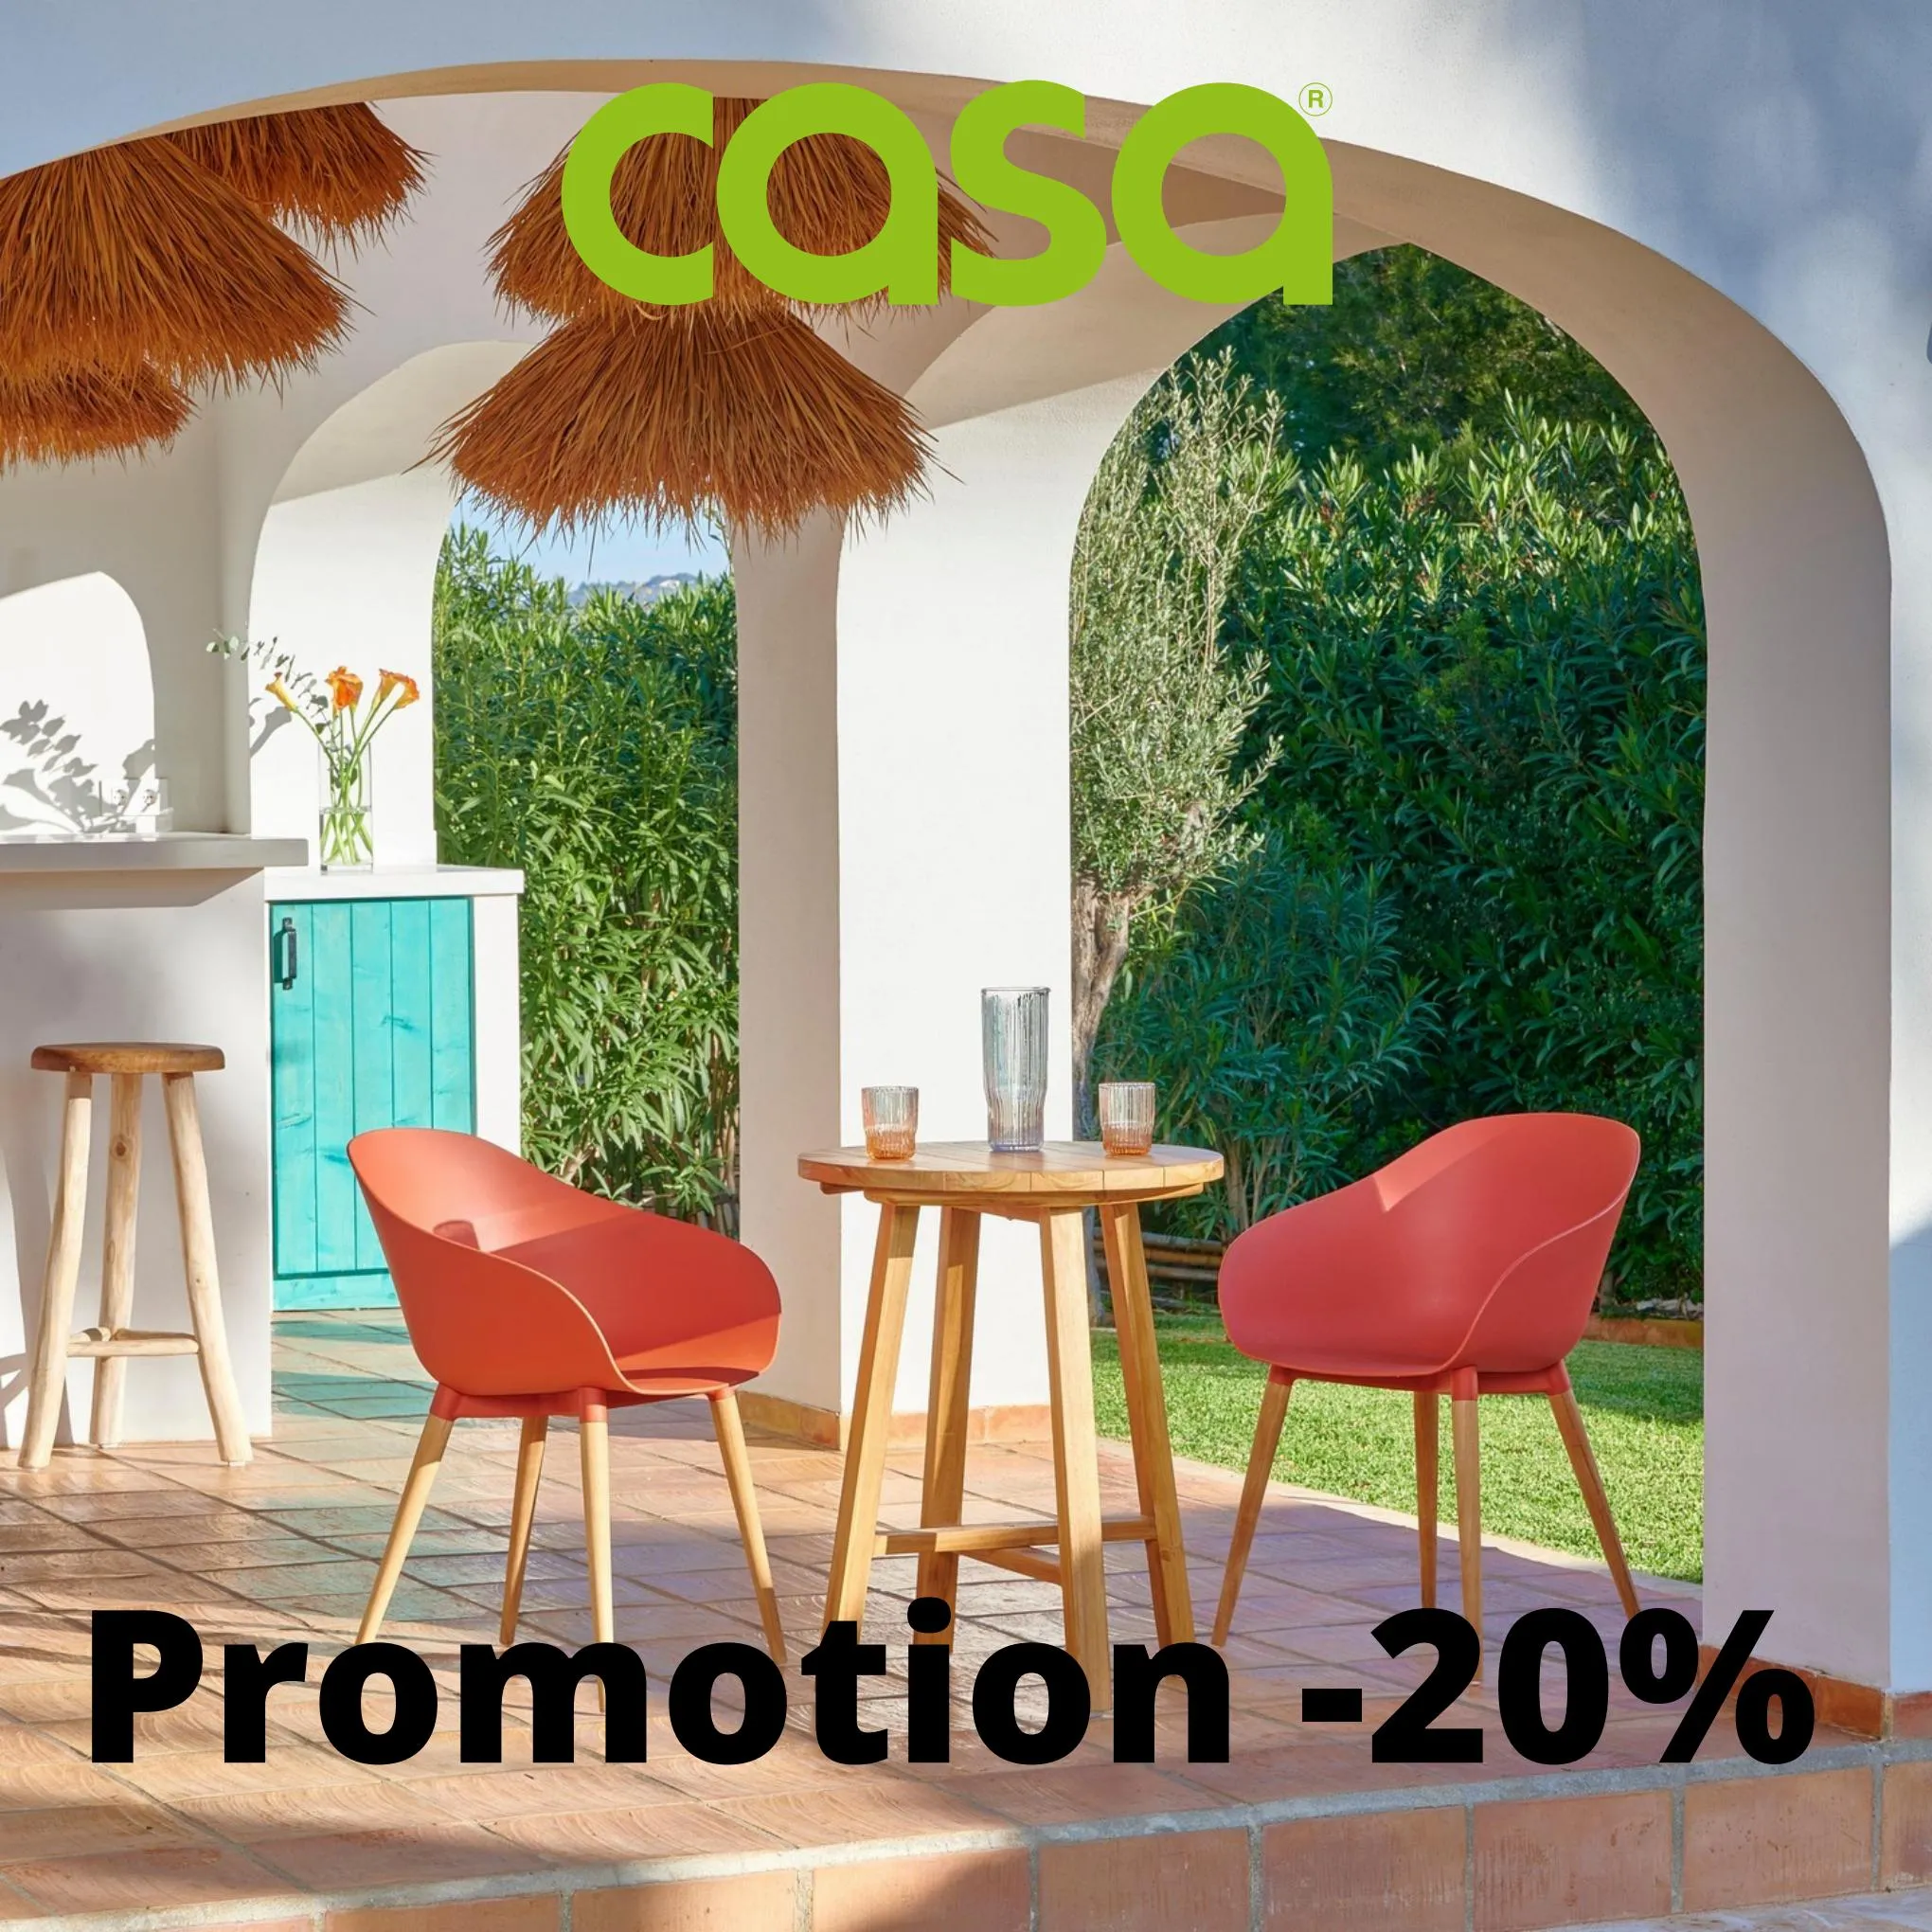 Catalogue Promotion -20%, page 00001